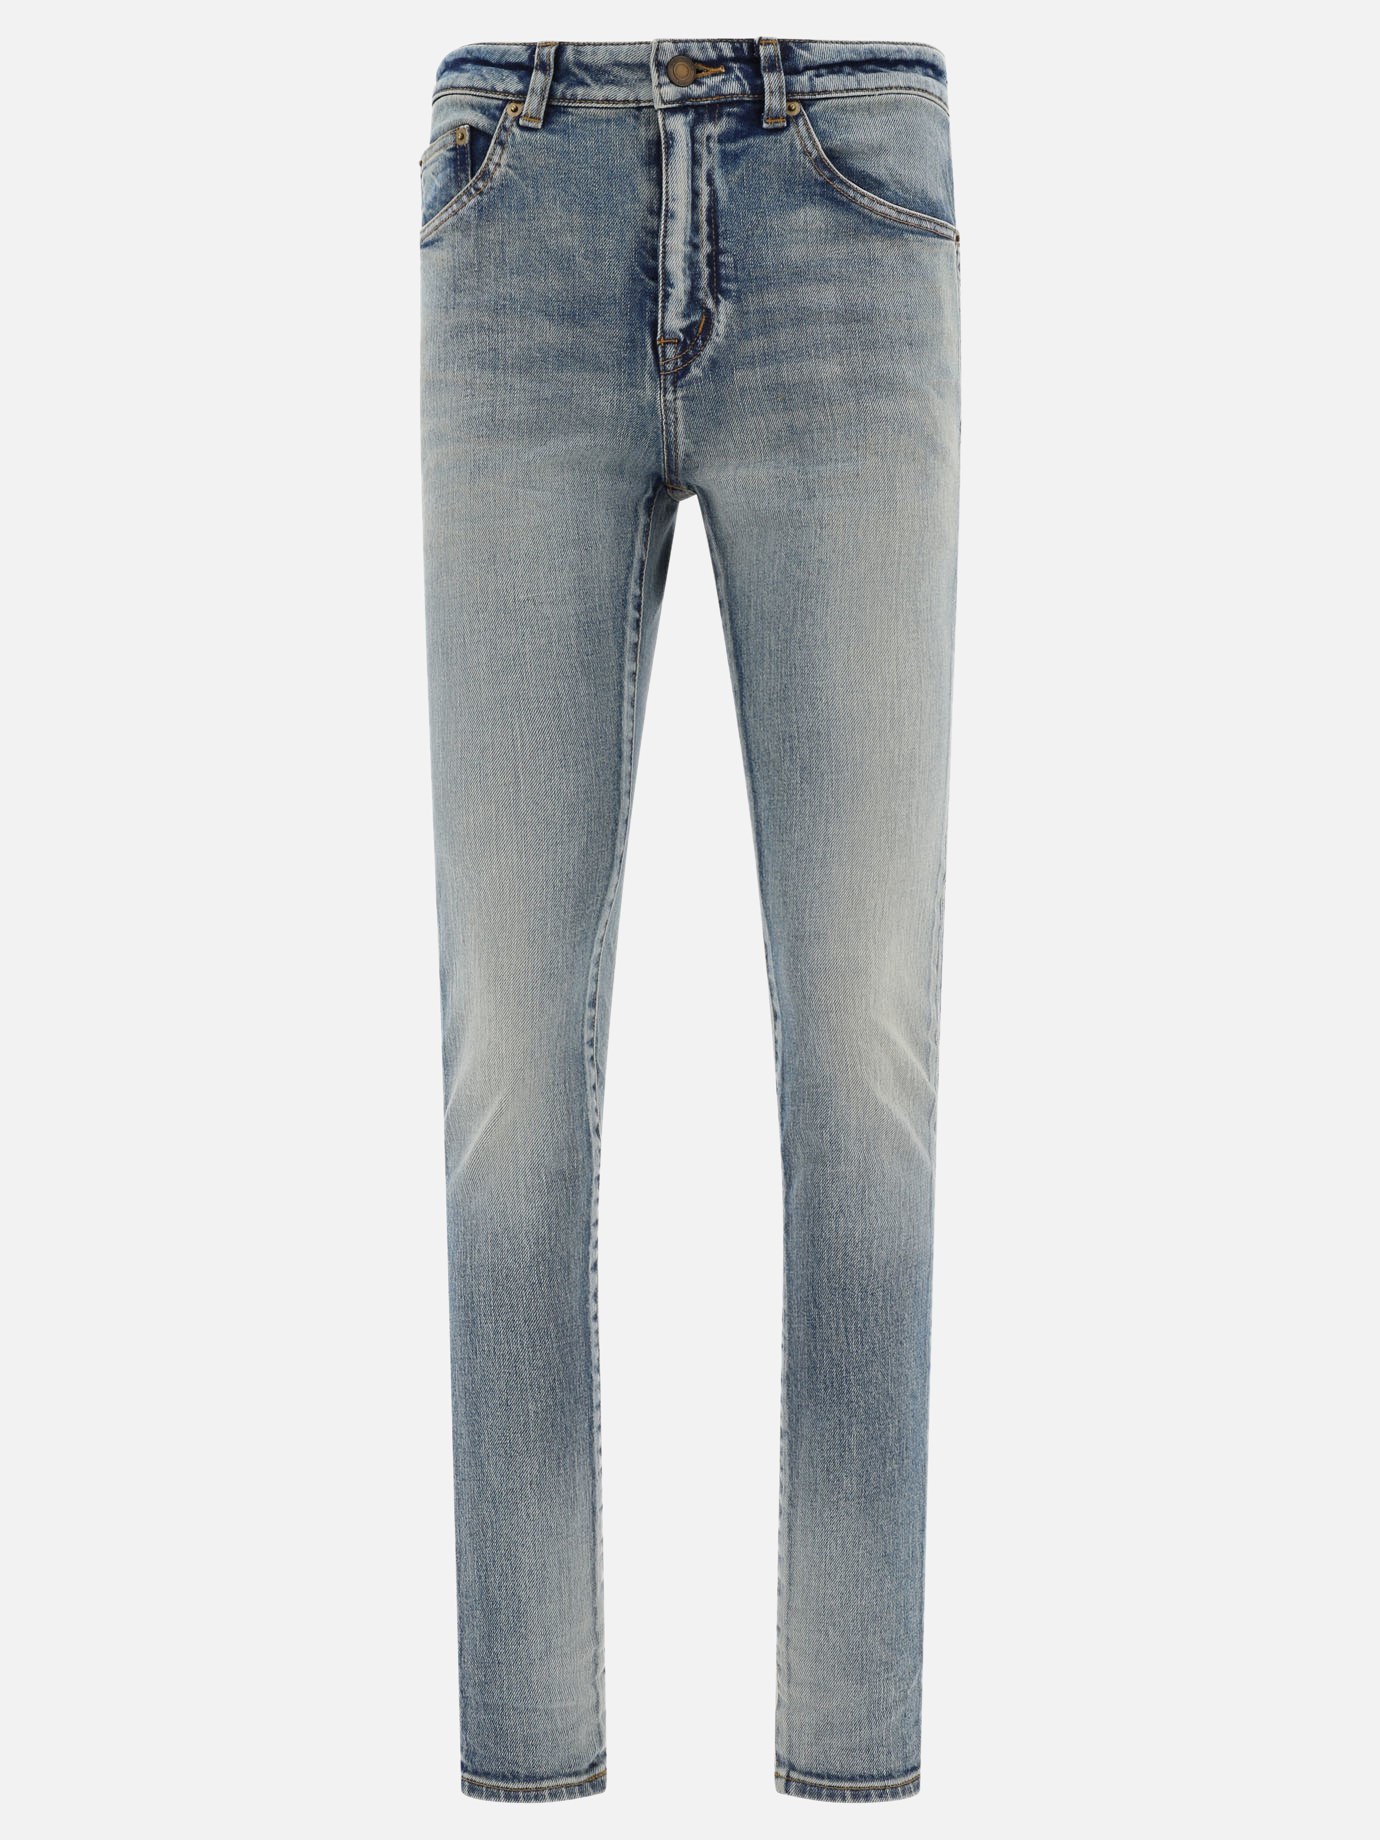 Washed out jeansby Saint Laurent - 1